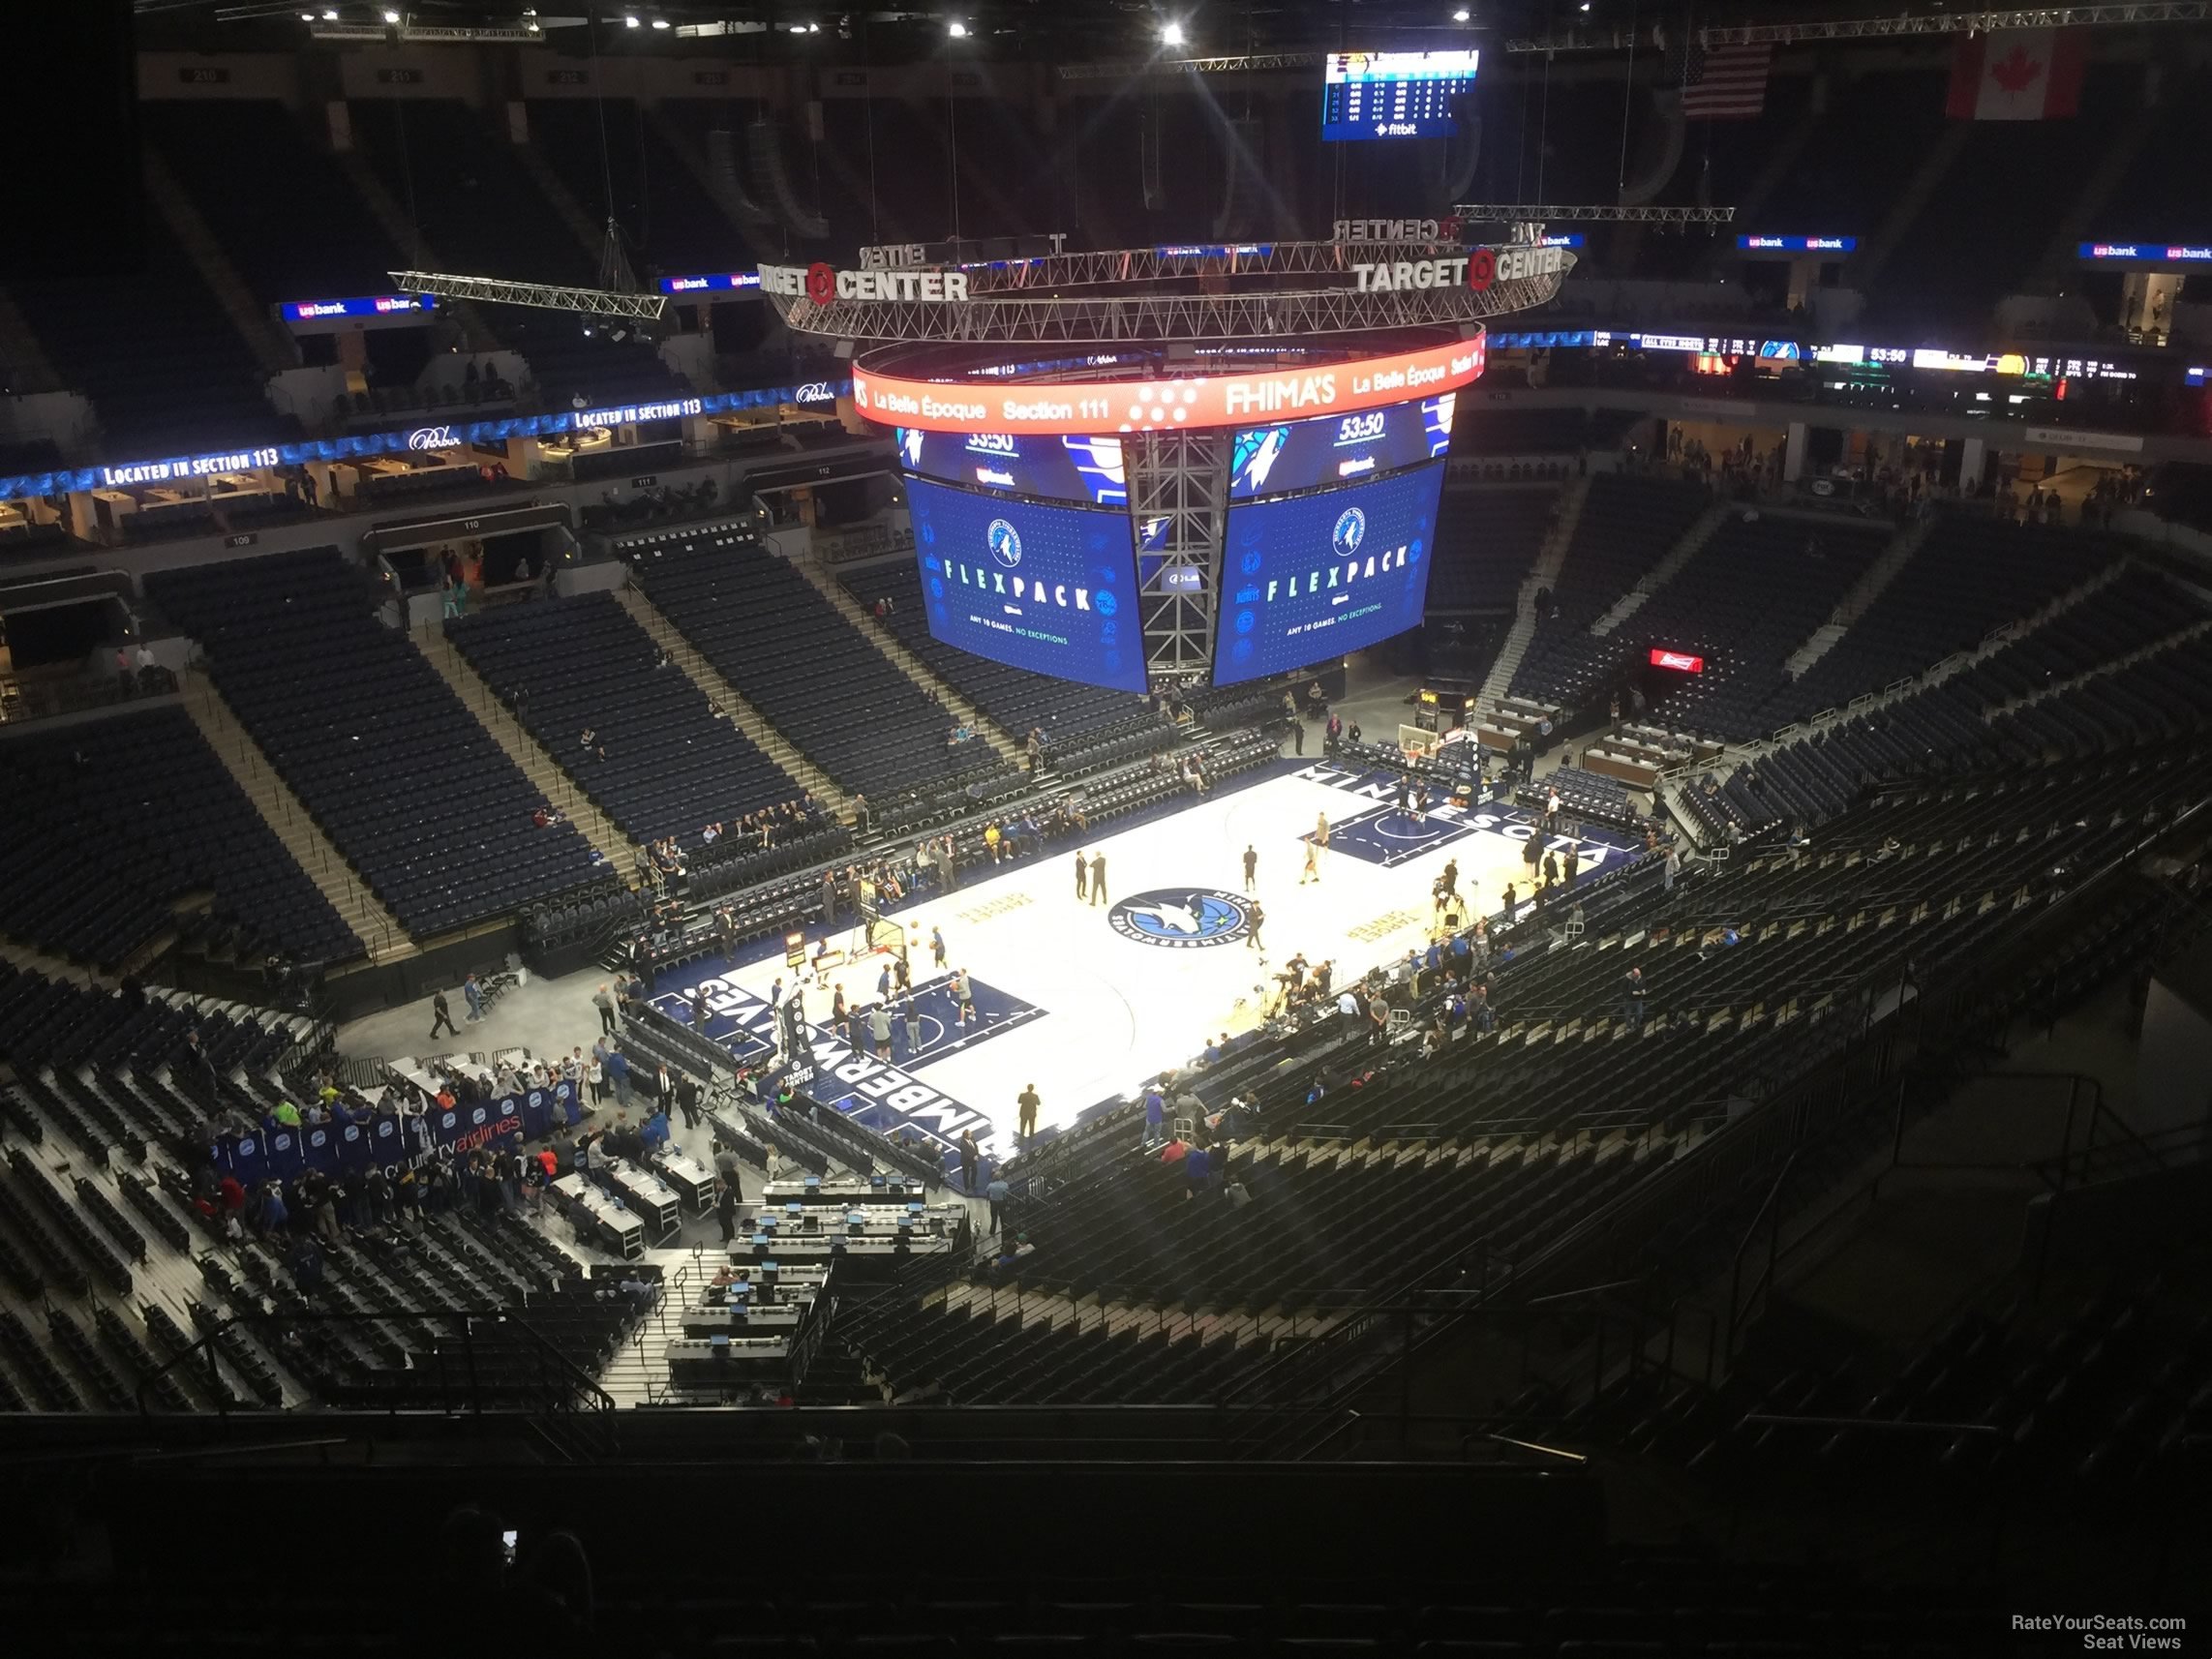 Section 236 at Target Center